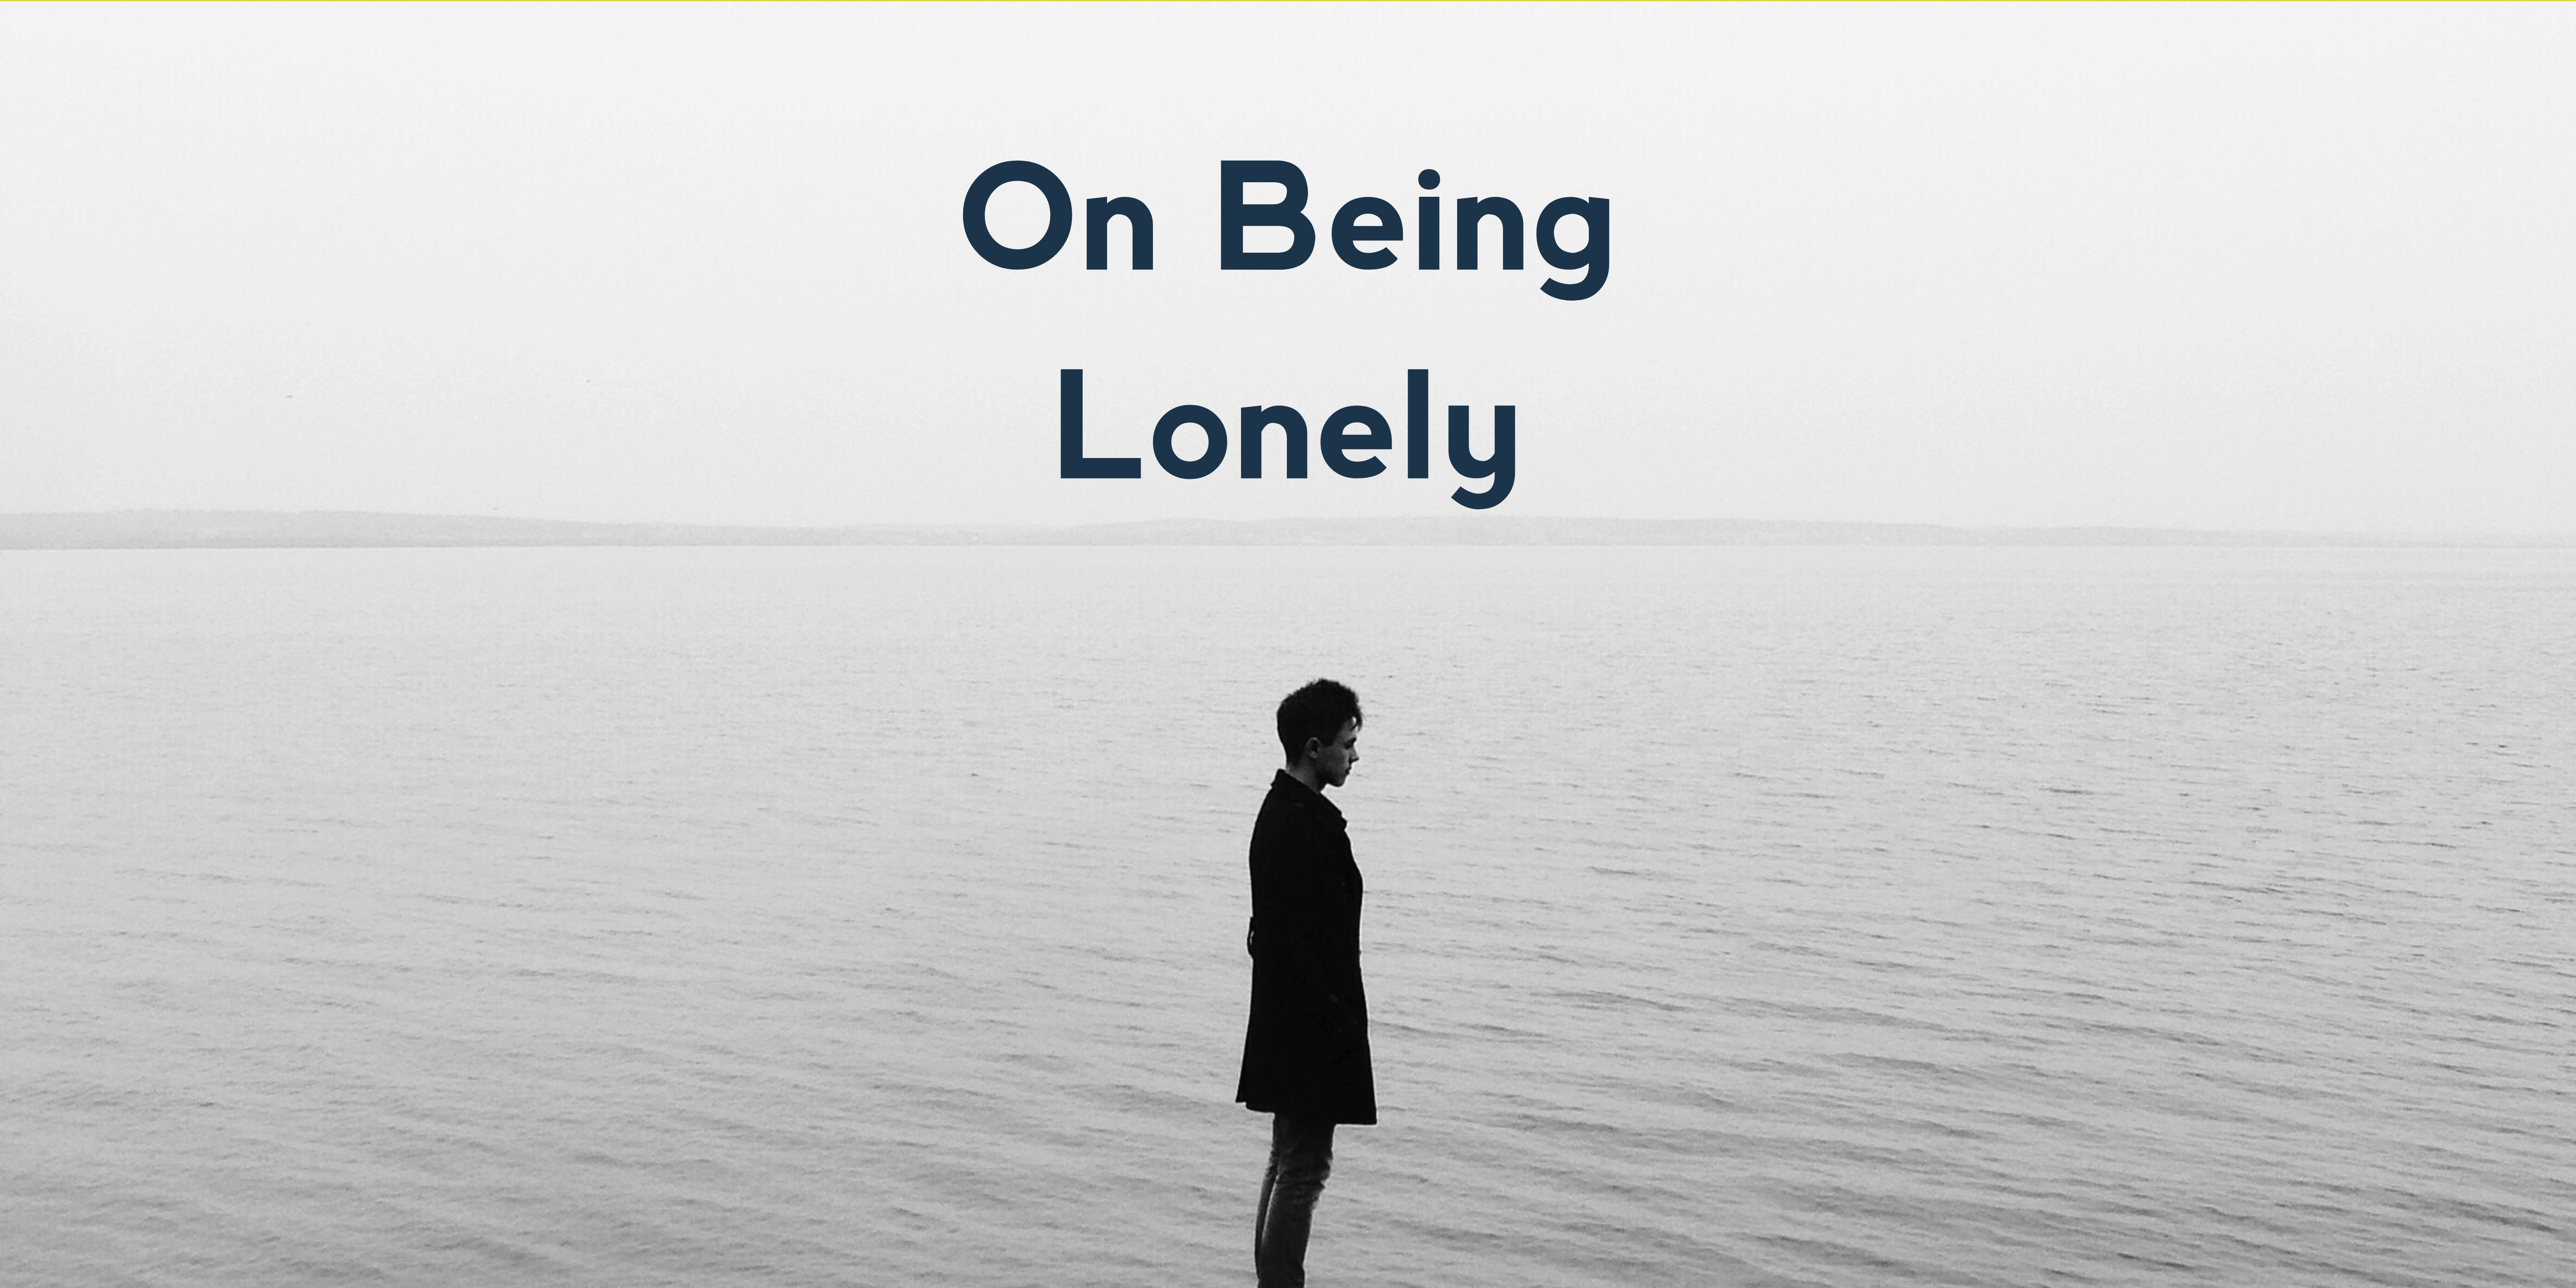 On Being Lonely